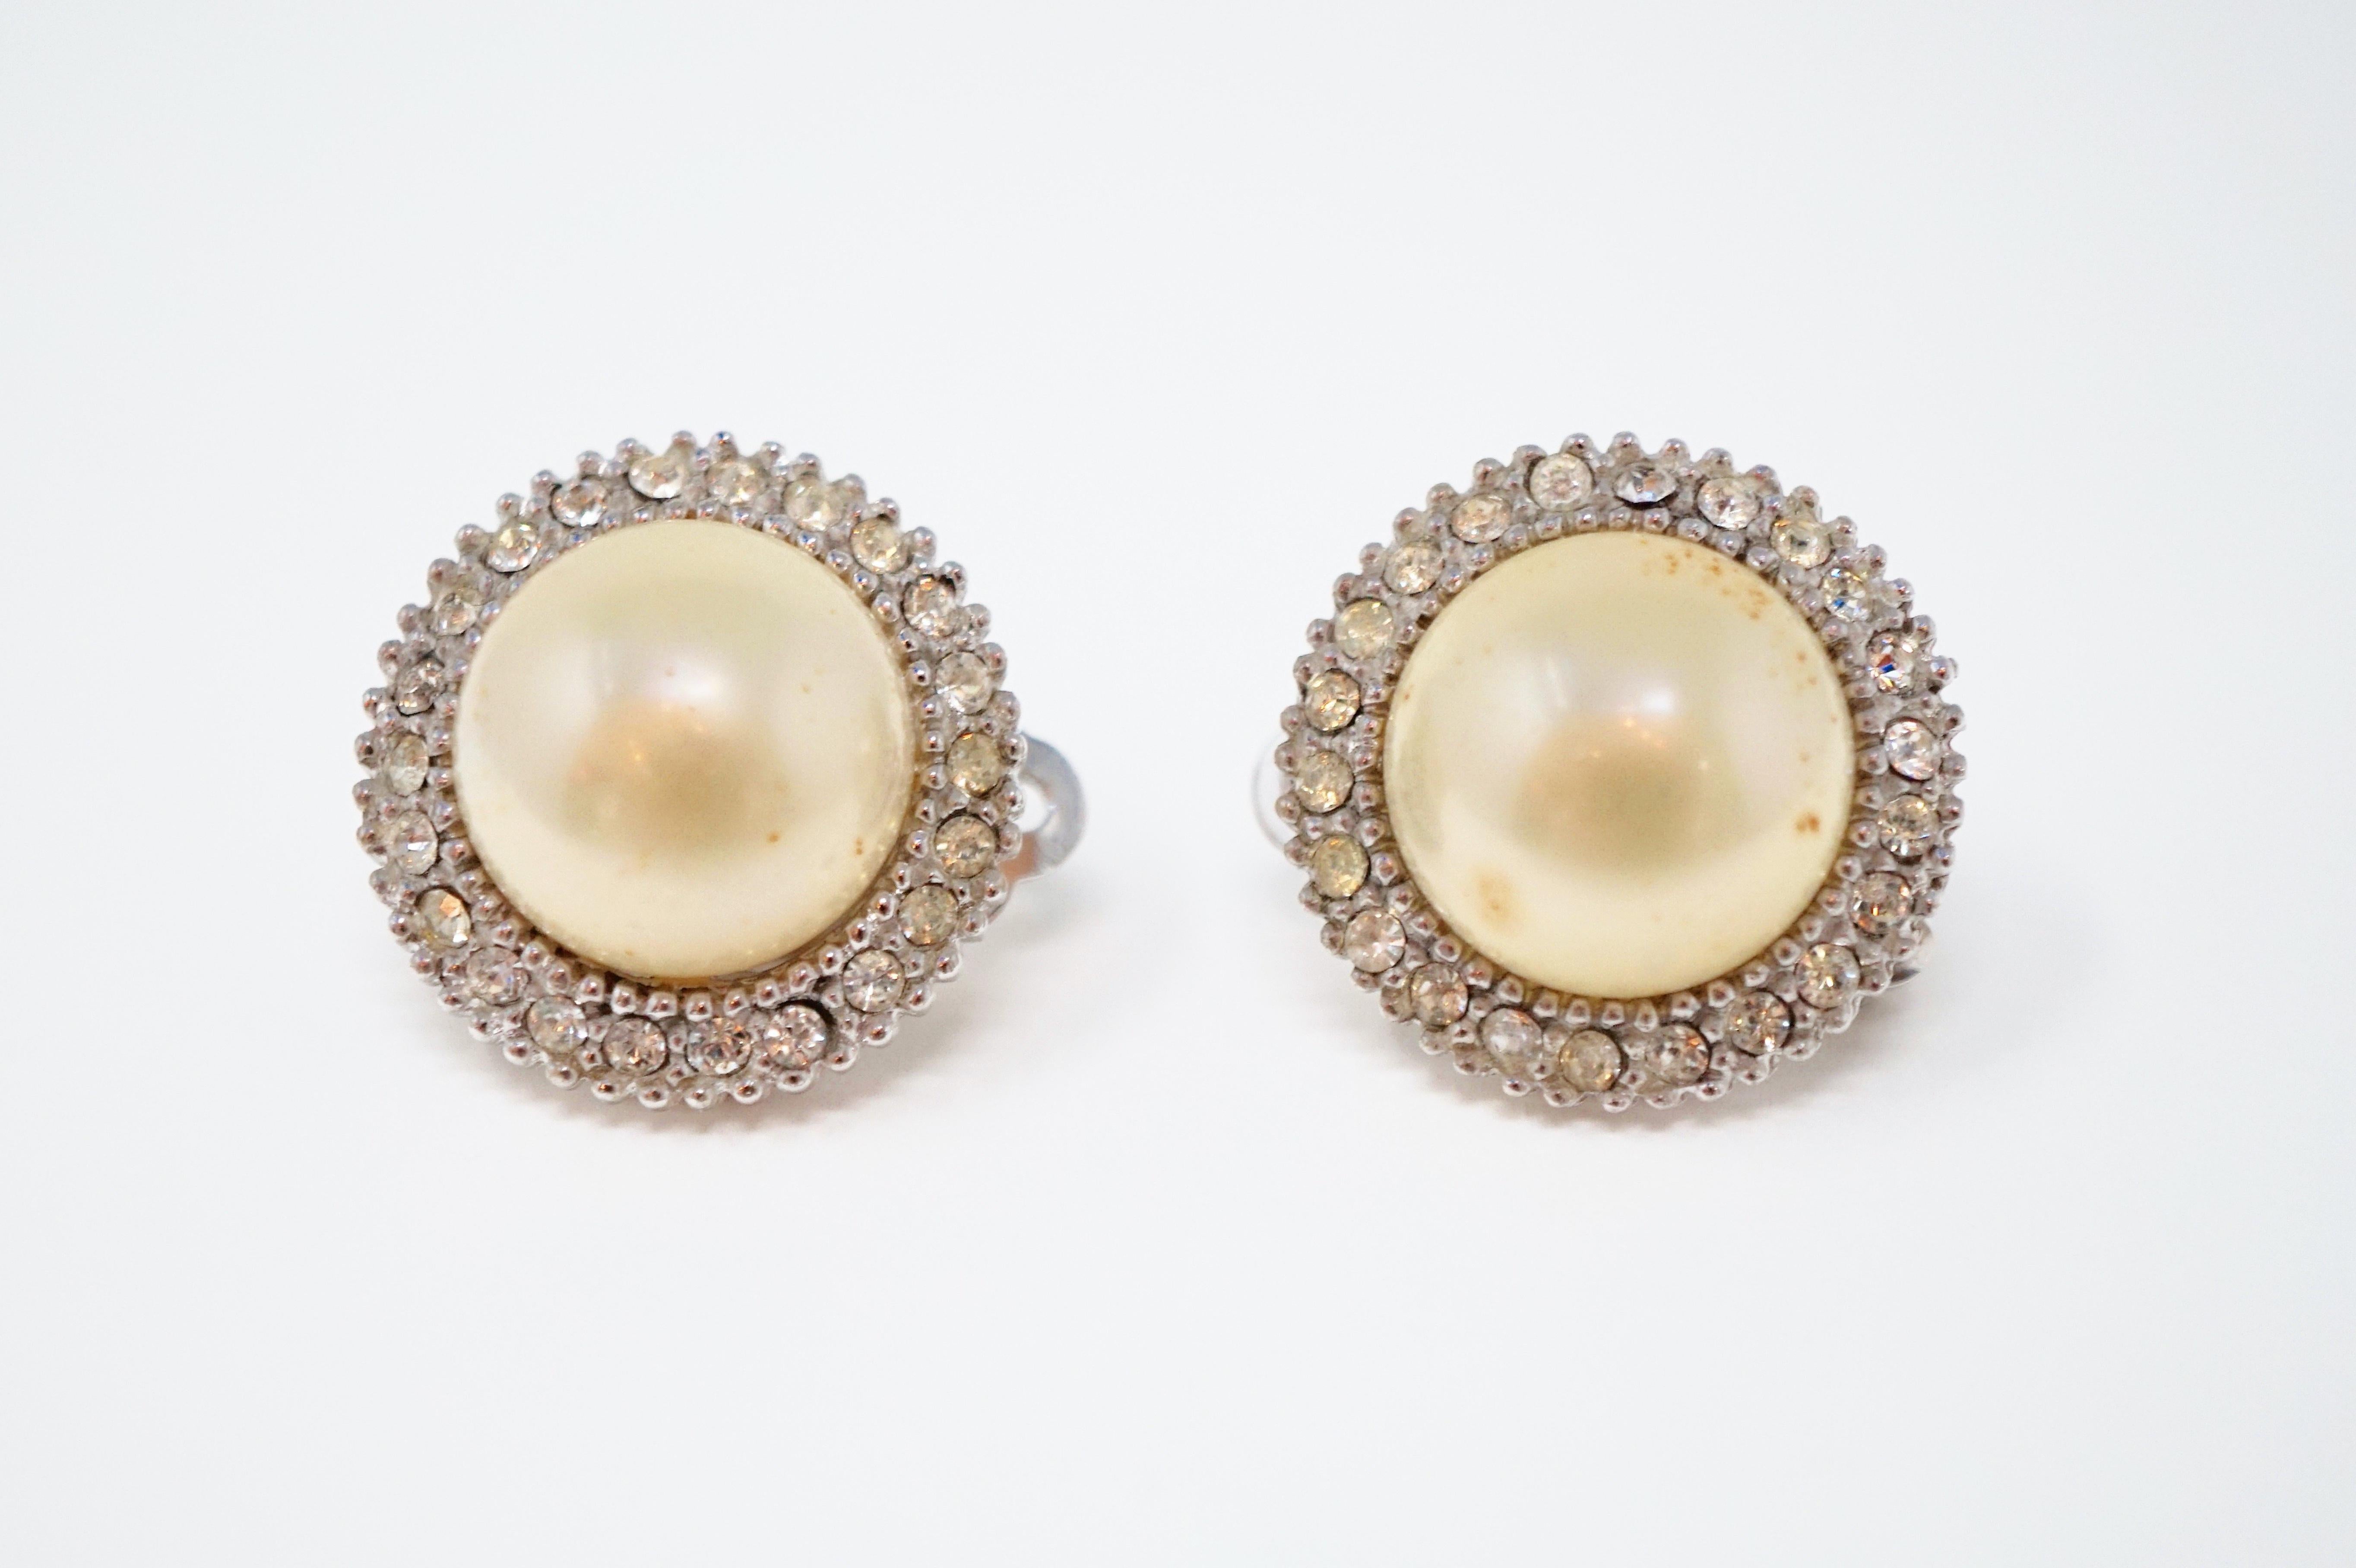 These gorgeous vintage faux pearl and crystal rhinestone pavé clip-on earrings by iconic costume jewelry brand, Ciner, are a perfect way to add a touch of elegance to your look.  Set against silver tone hardware, these earrings are perfect for